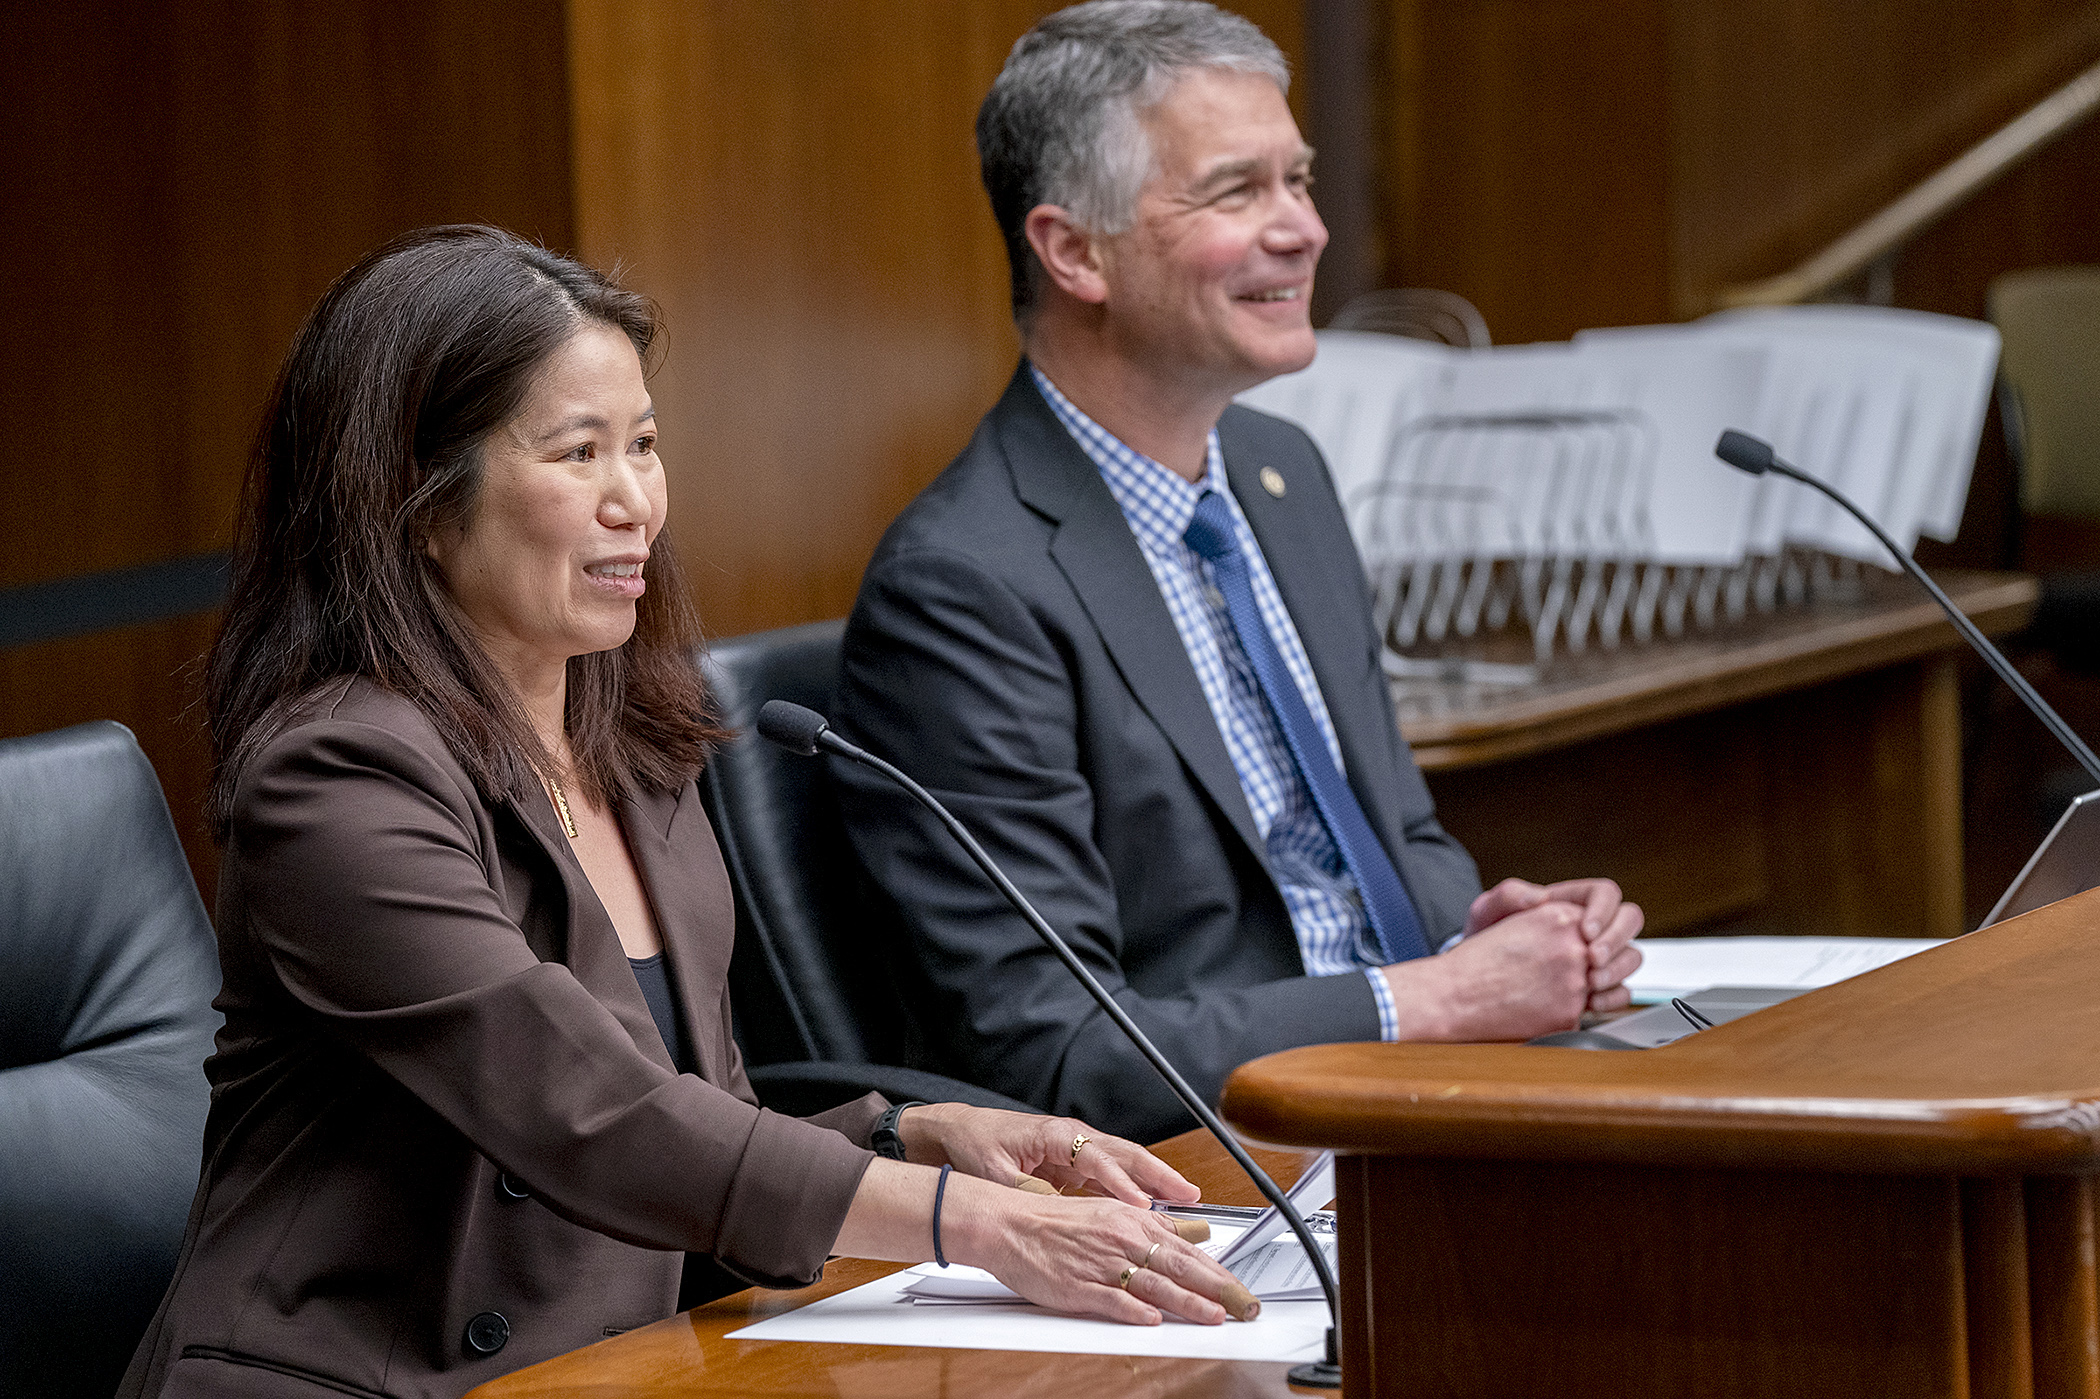 Stacey Fujii, government affairs director for Great River Energy, testifies before the House's climate and energy committee Feb. 28 on HF3704, sponsored by Rep. Larry Kraft, right. (Photo by Michele Jokinen)